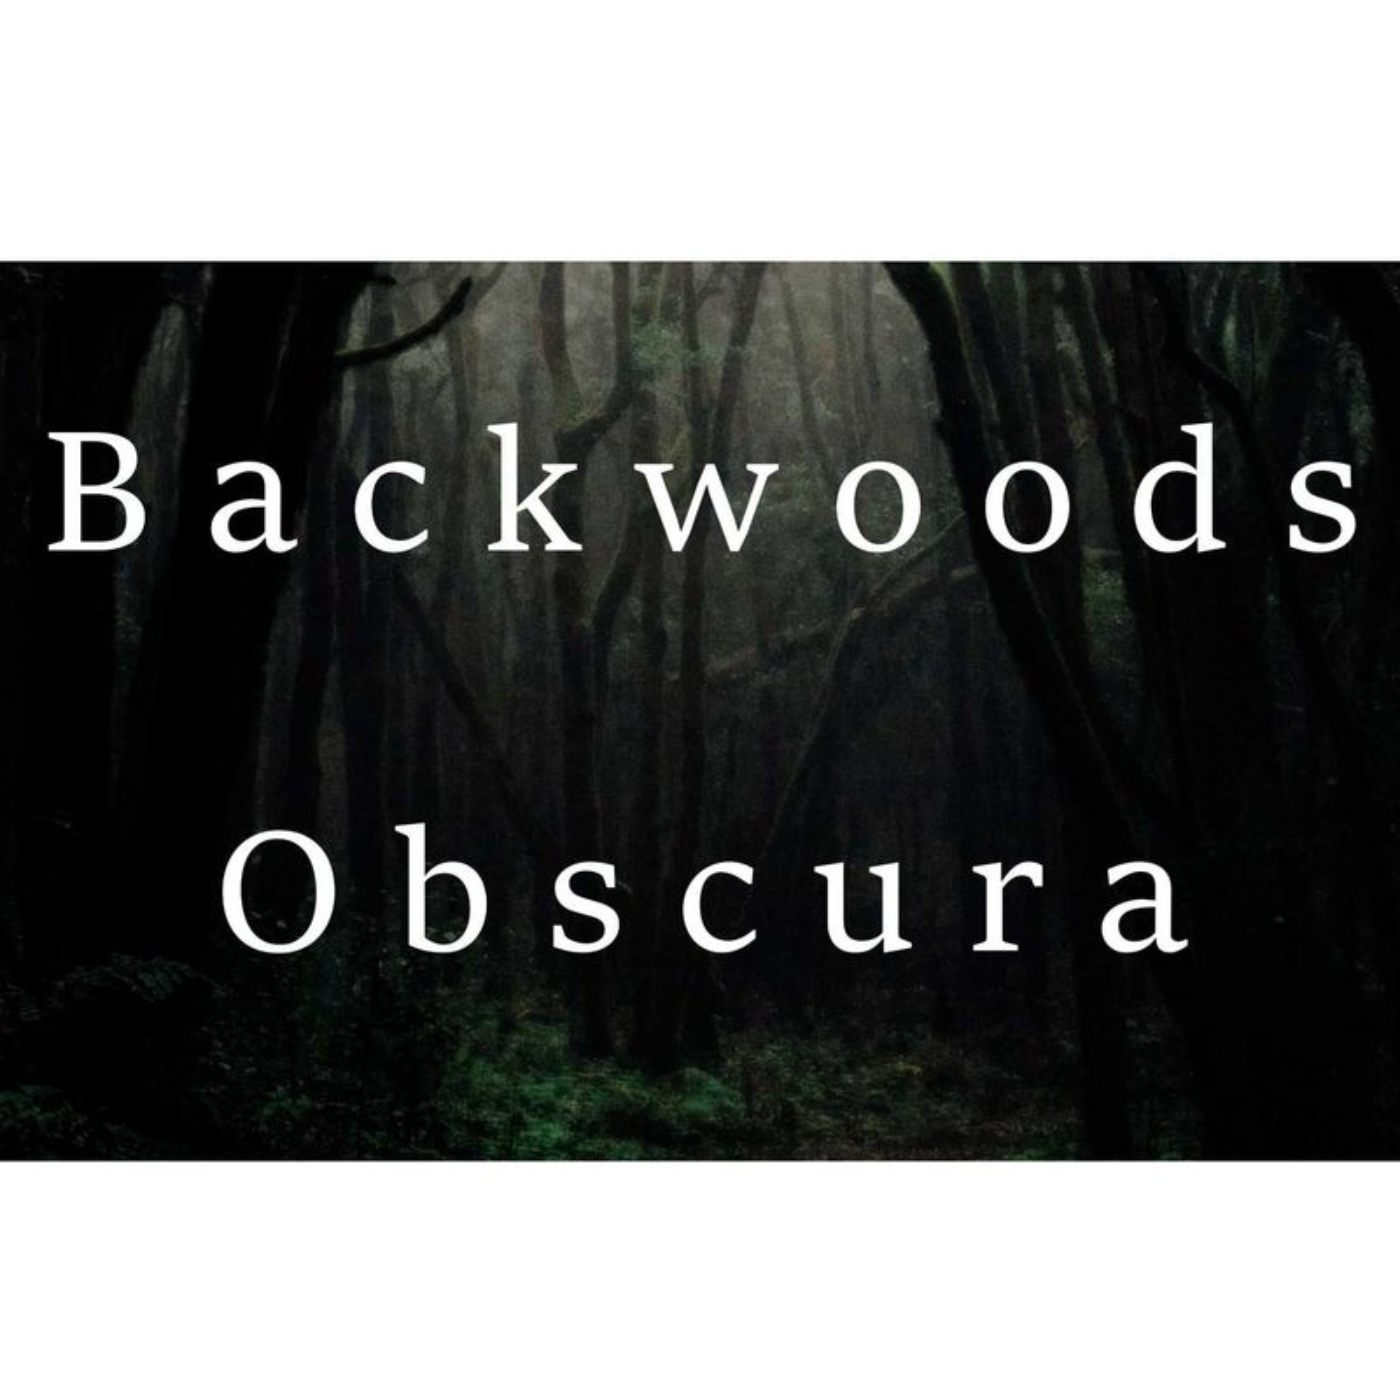 0109 - A VERY TIRED AND WEARY CROSSROADS - Backwoods Obscura